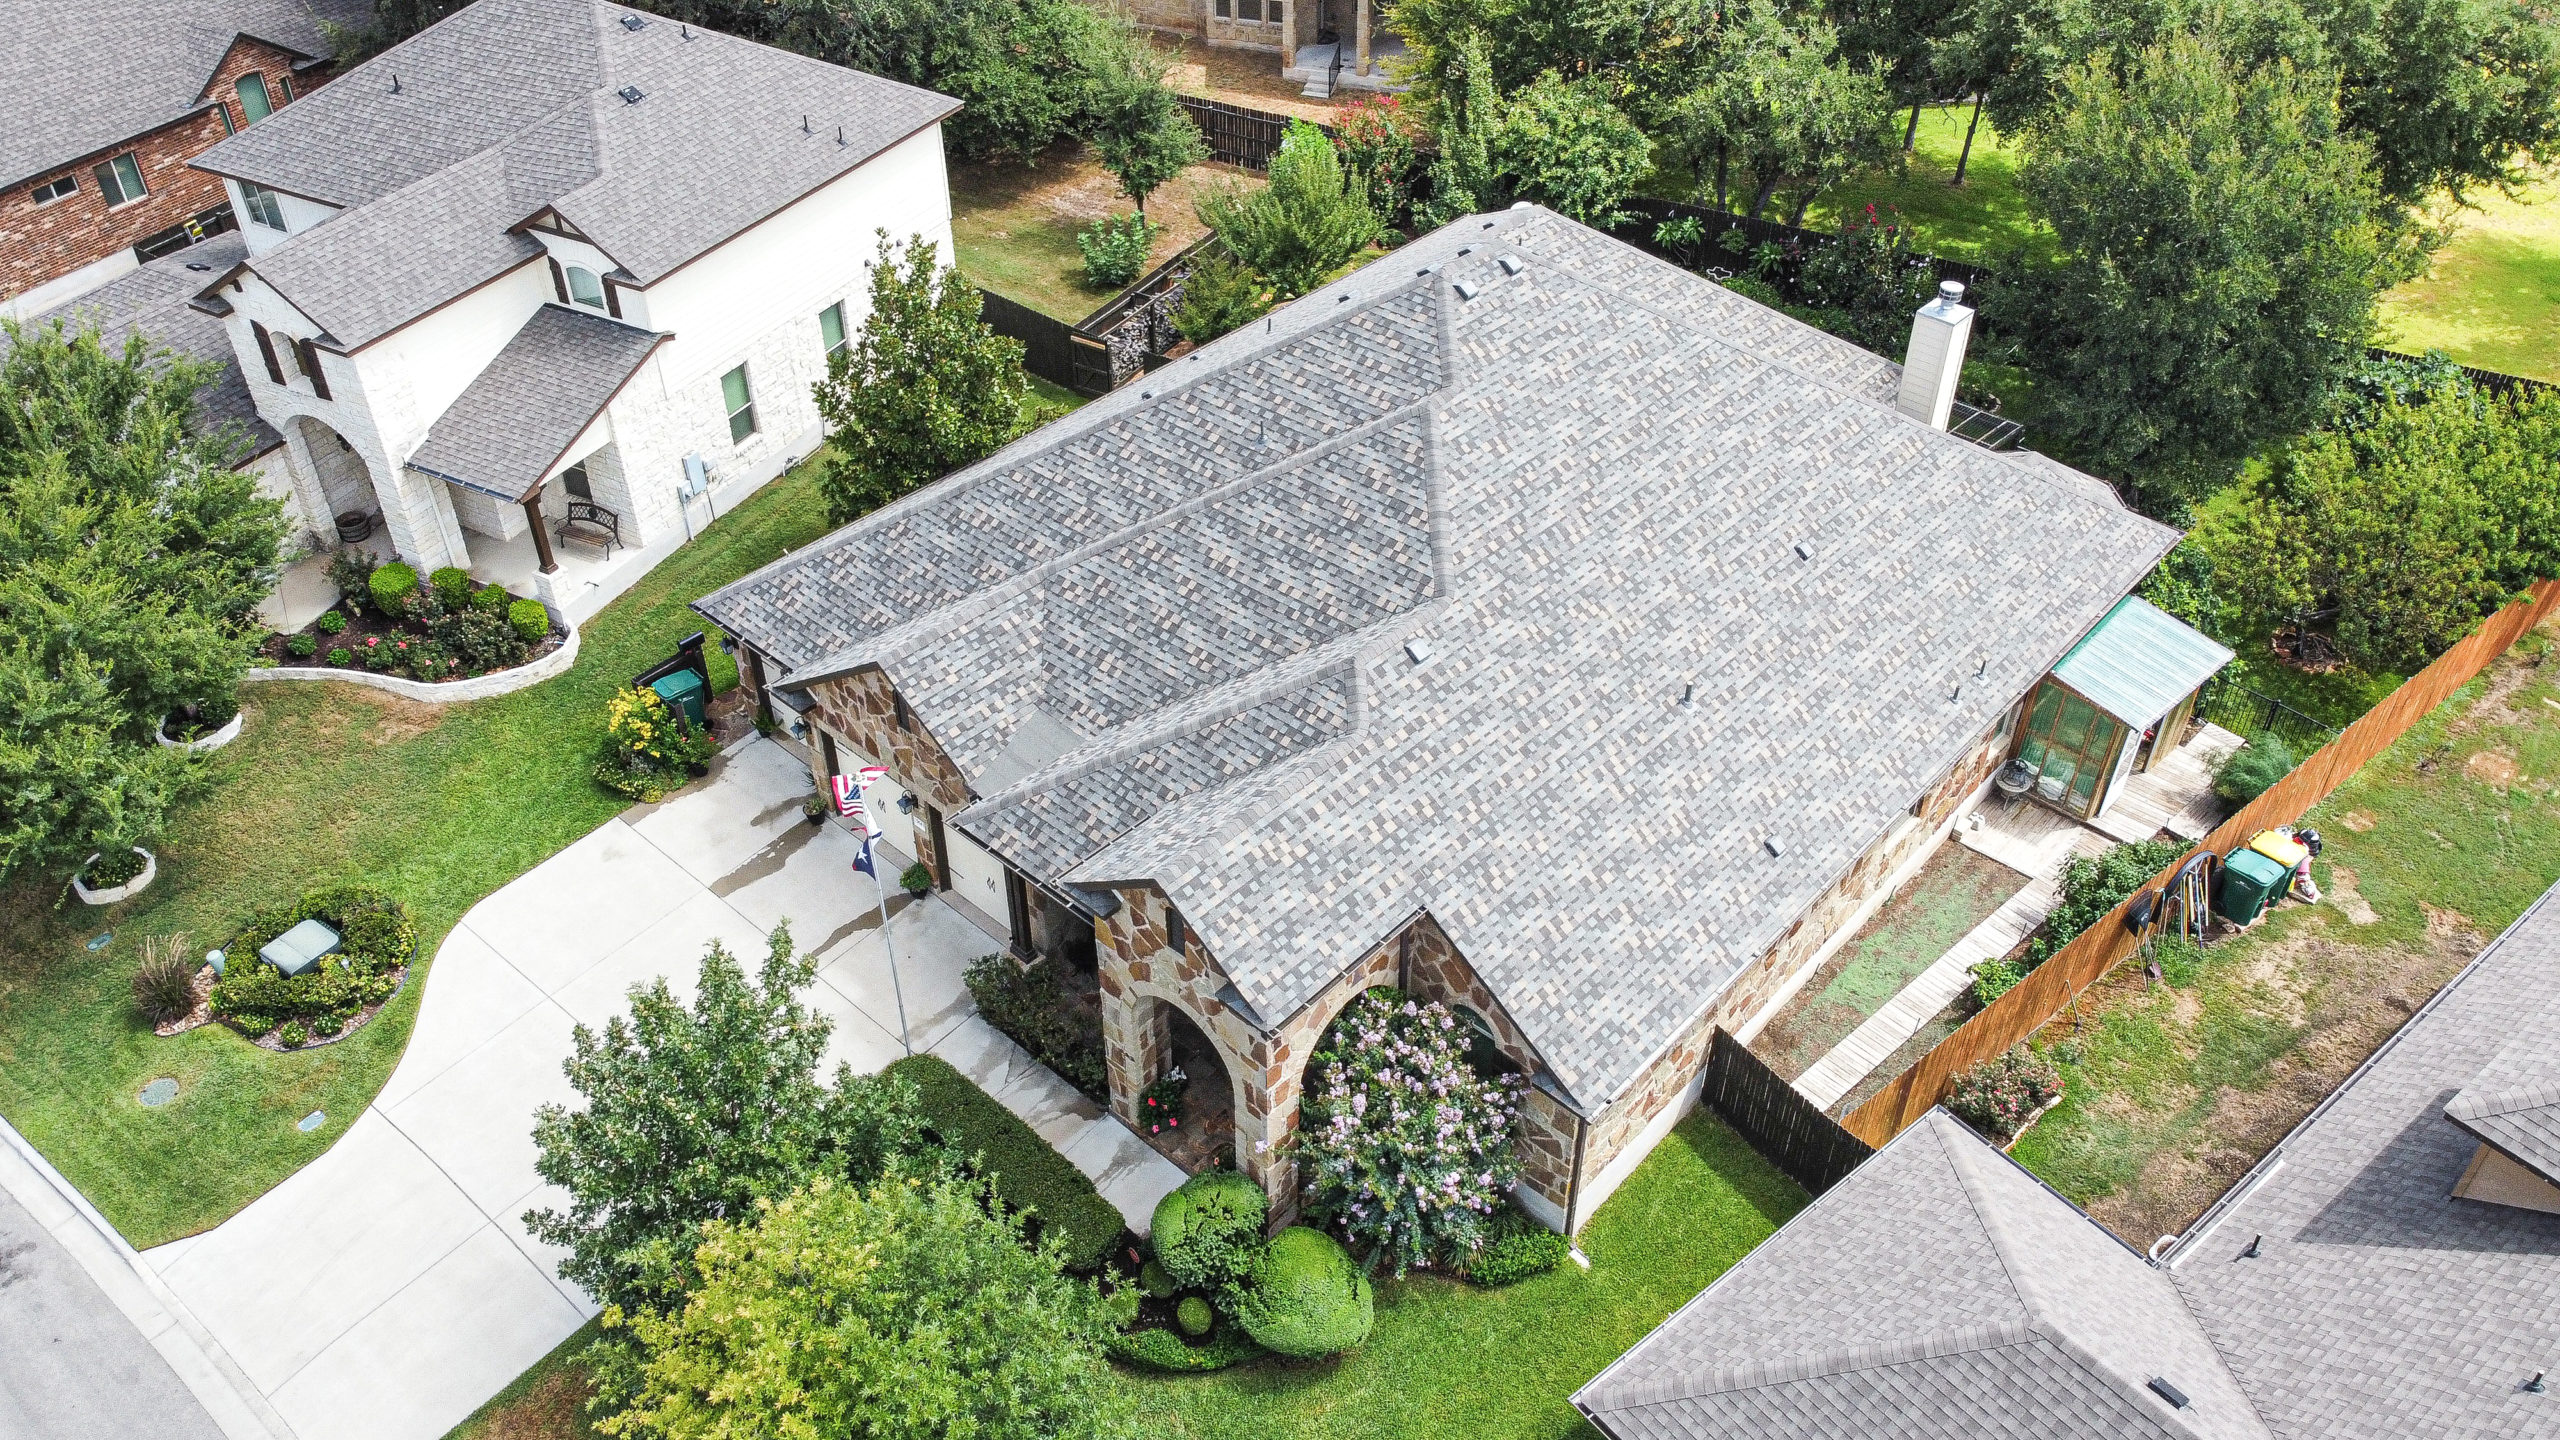 IKO Dynasty in Cornerstone Roof replaced buy Whitish Roofing in Central Texas